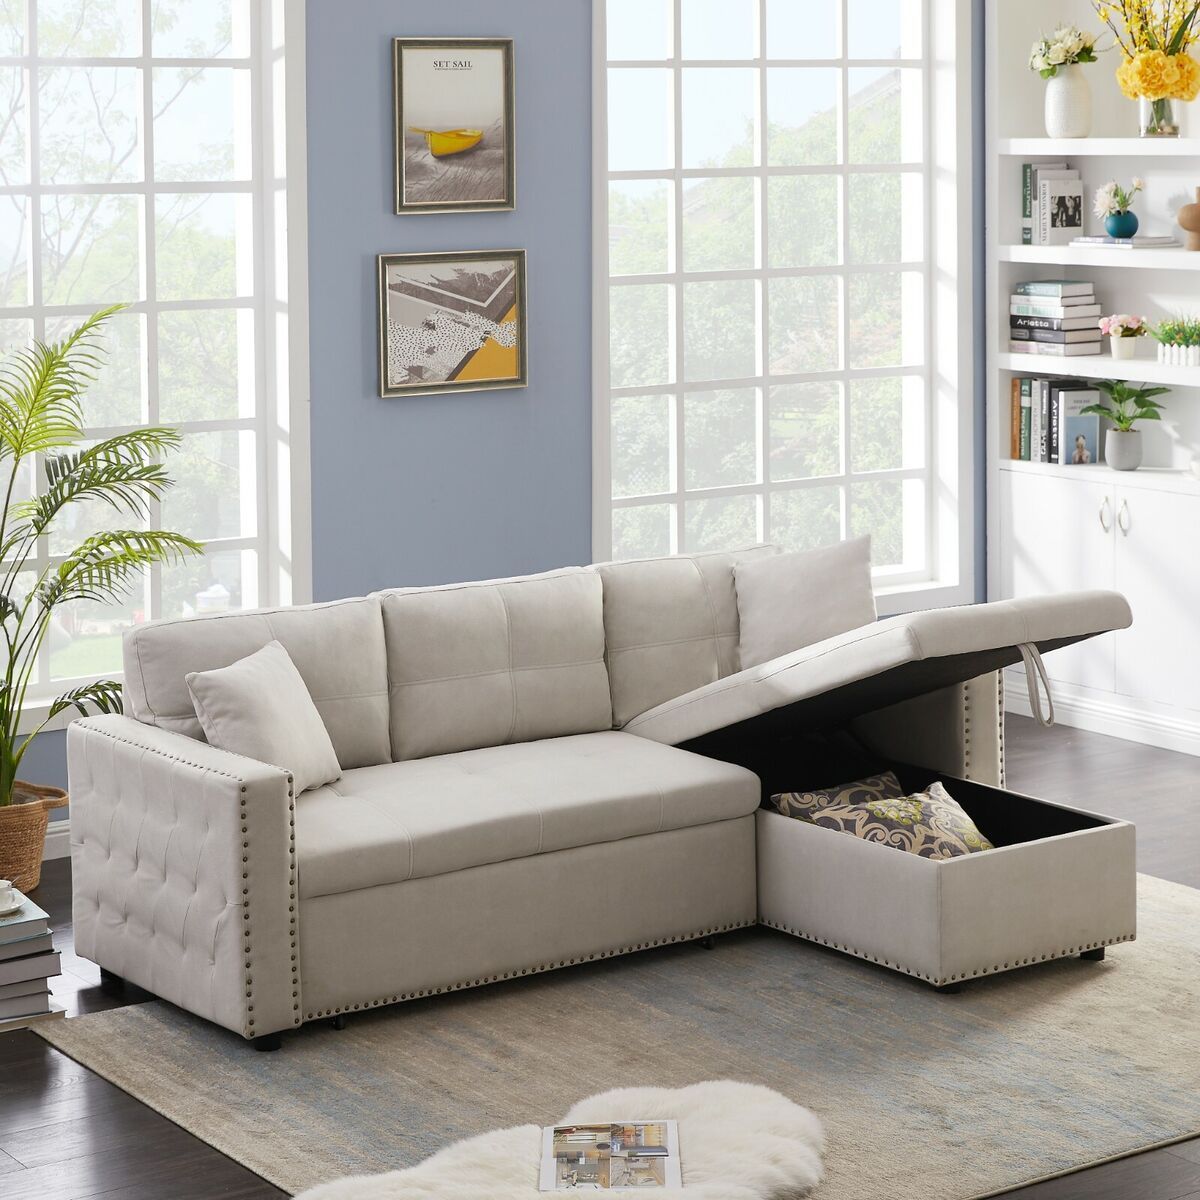 Reversible Sectional Leather Sofa Set Pull Off Bed Sofa L Shaped Corner  Couch | Ebay Throughout Reversible Sectional Sofas (View 3 of 15)